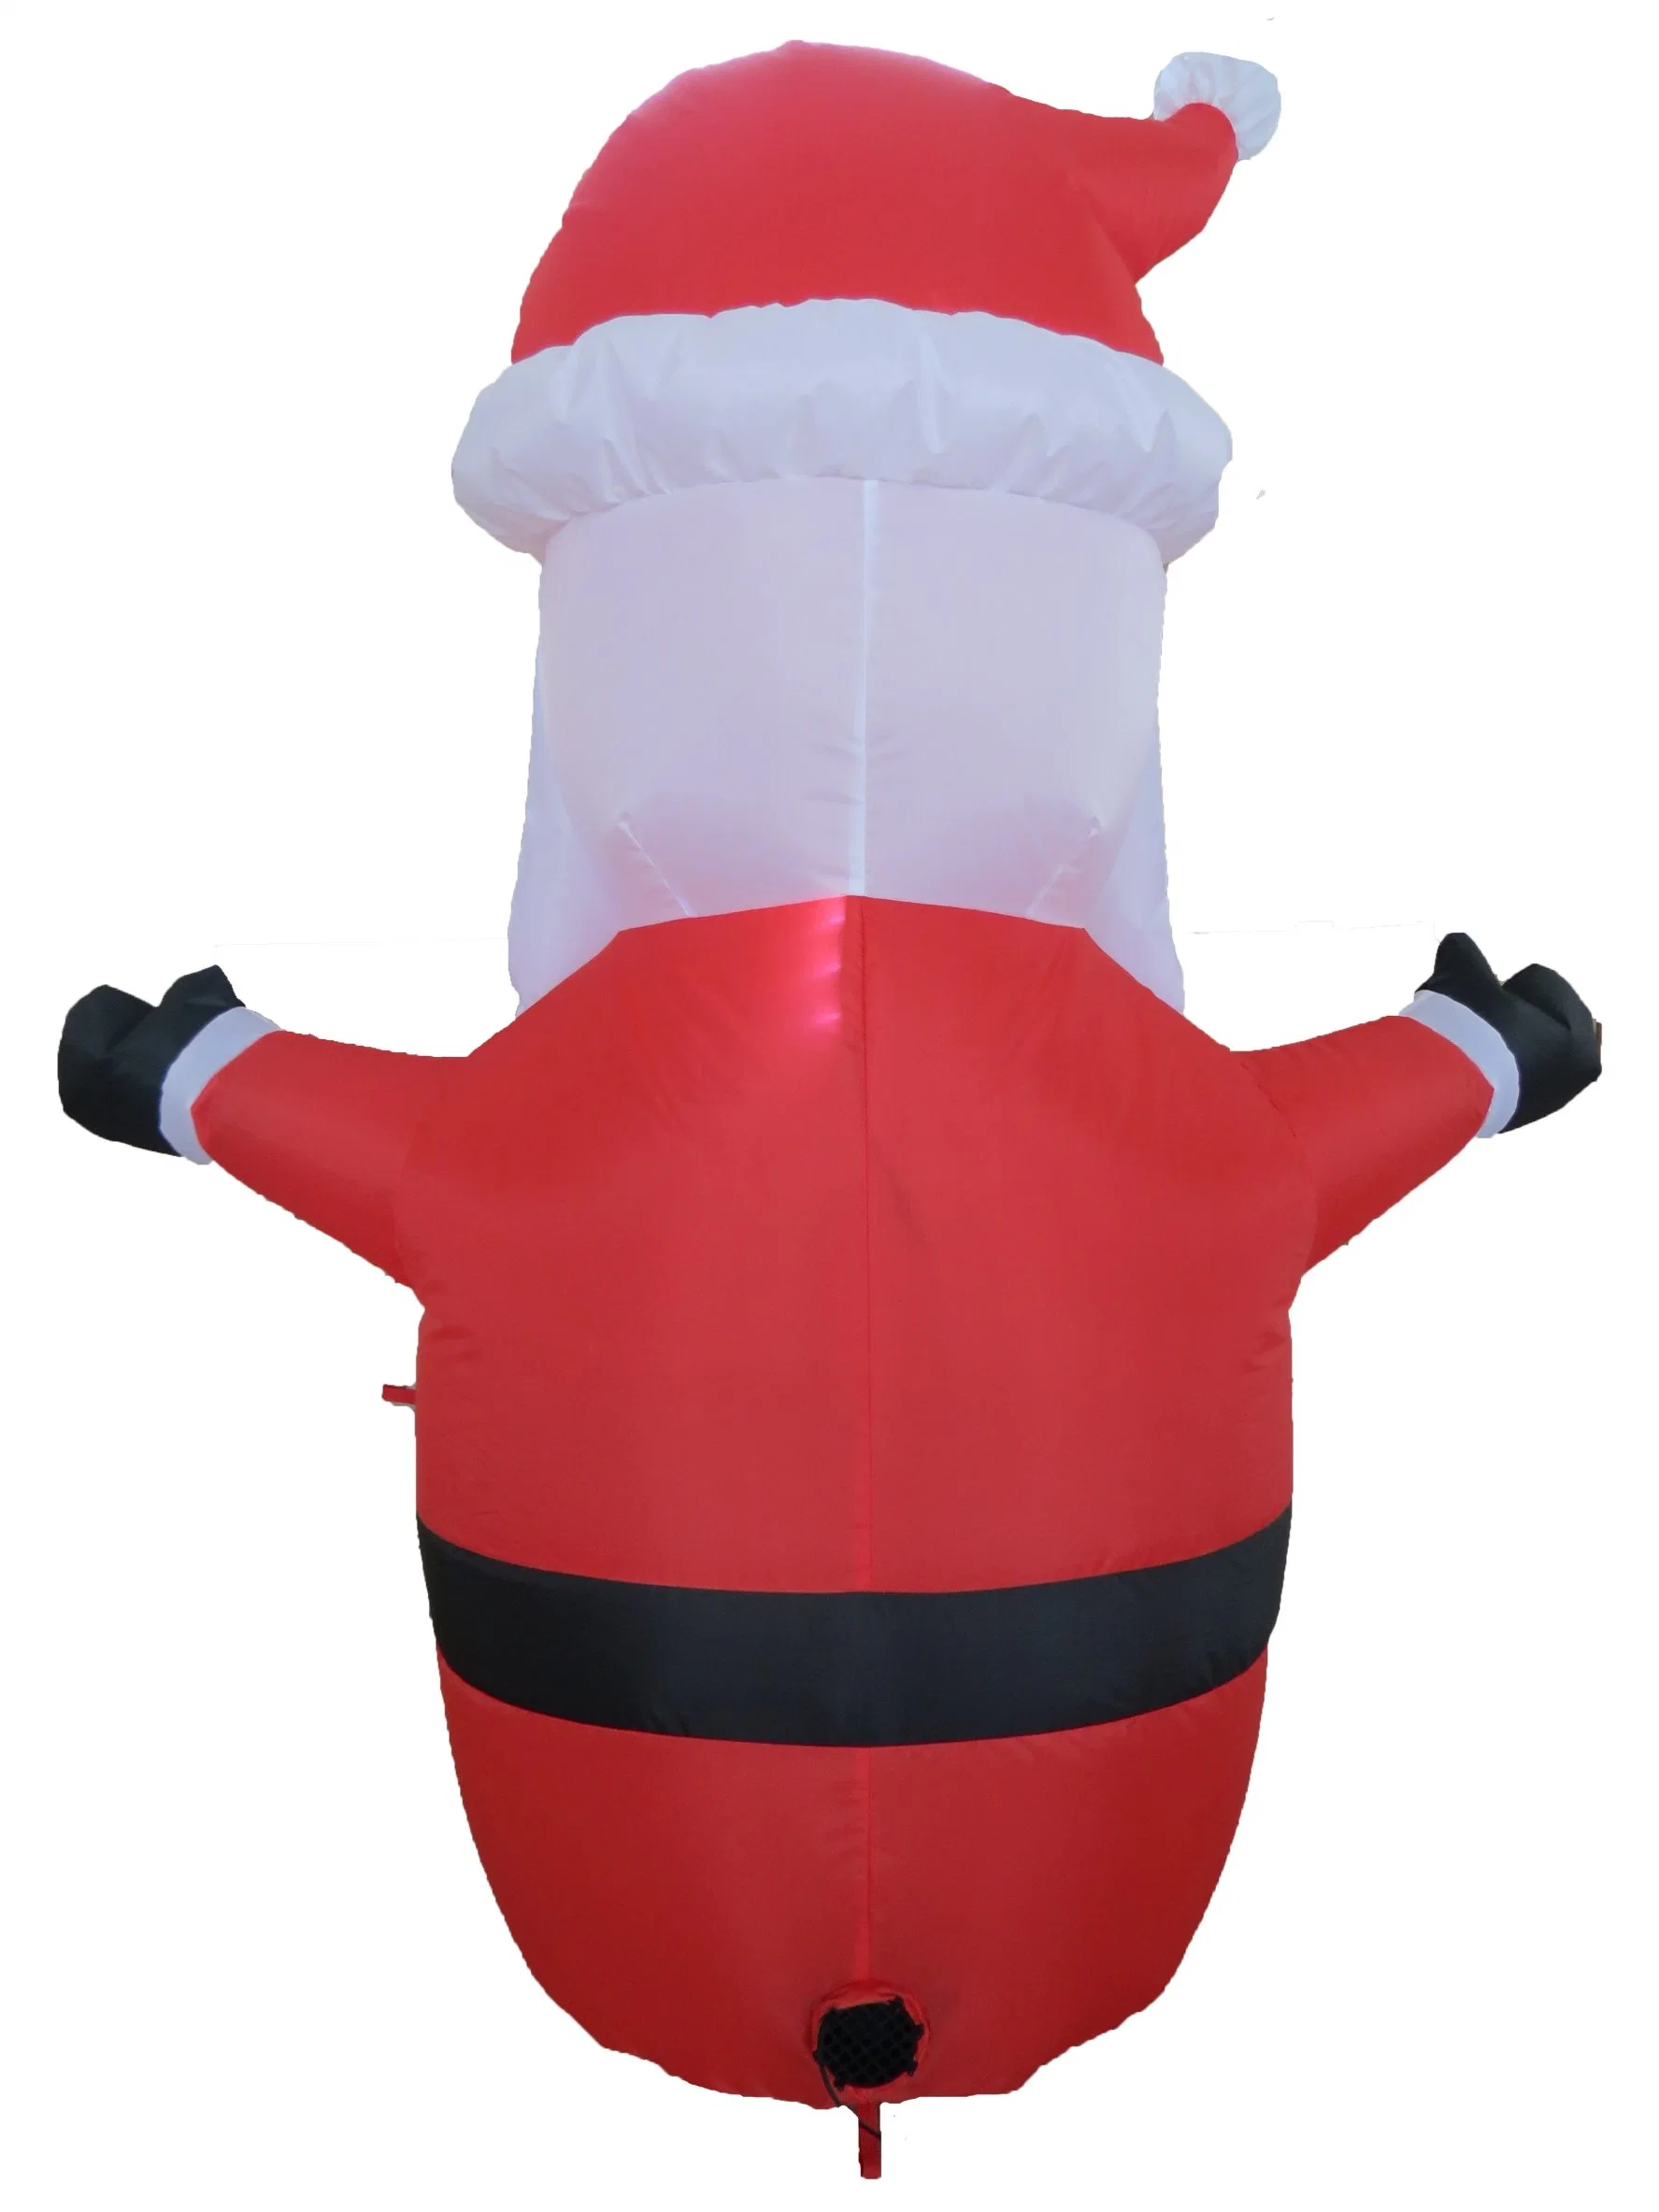 5FT Christmas Santa Claus LED Outdoor Giant Inflatable Opening Hand Decoration